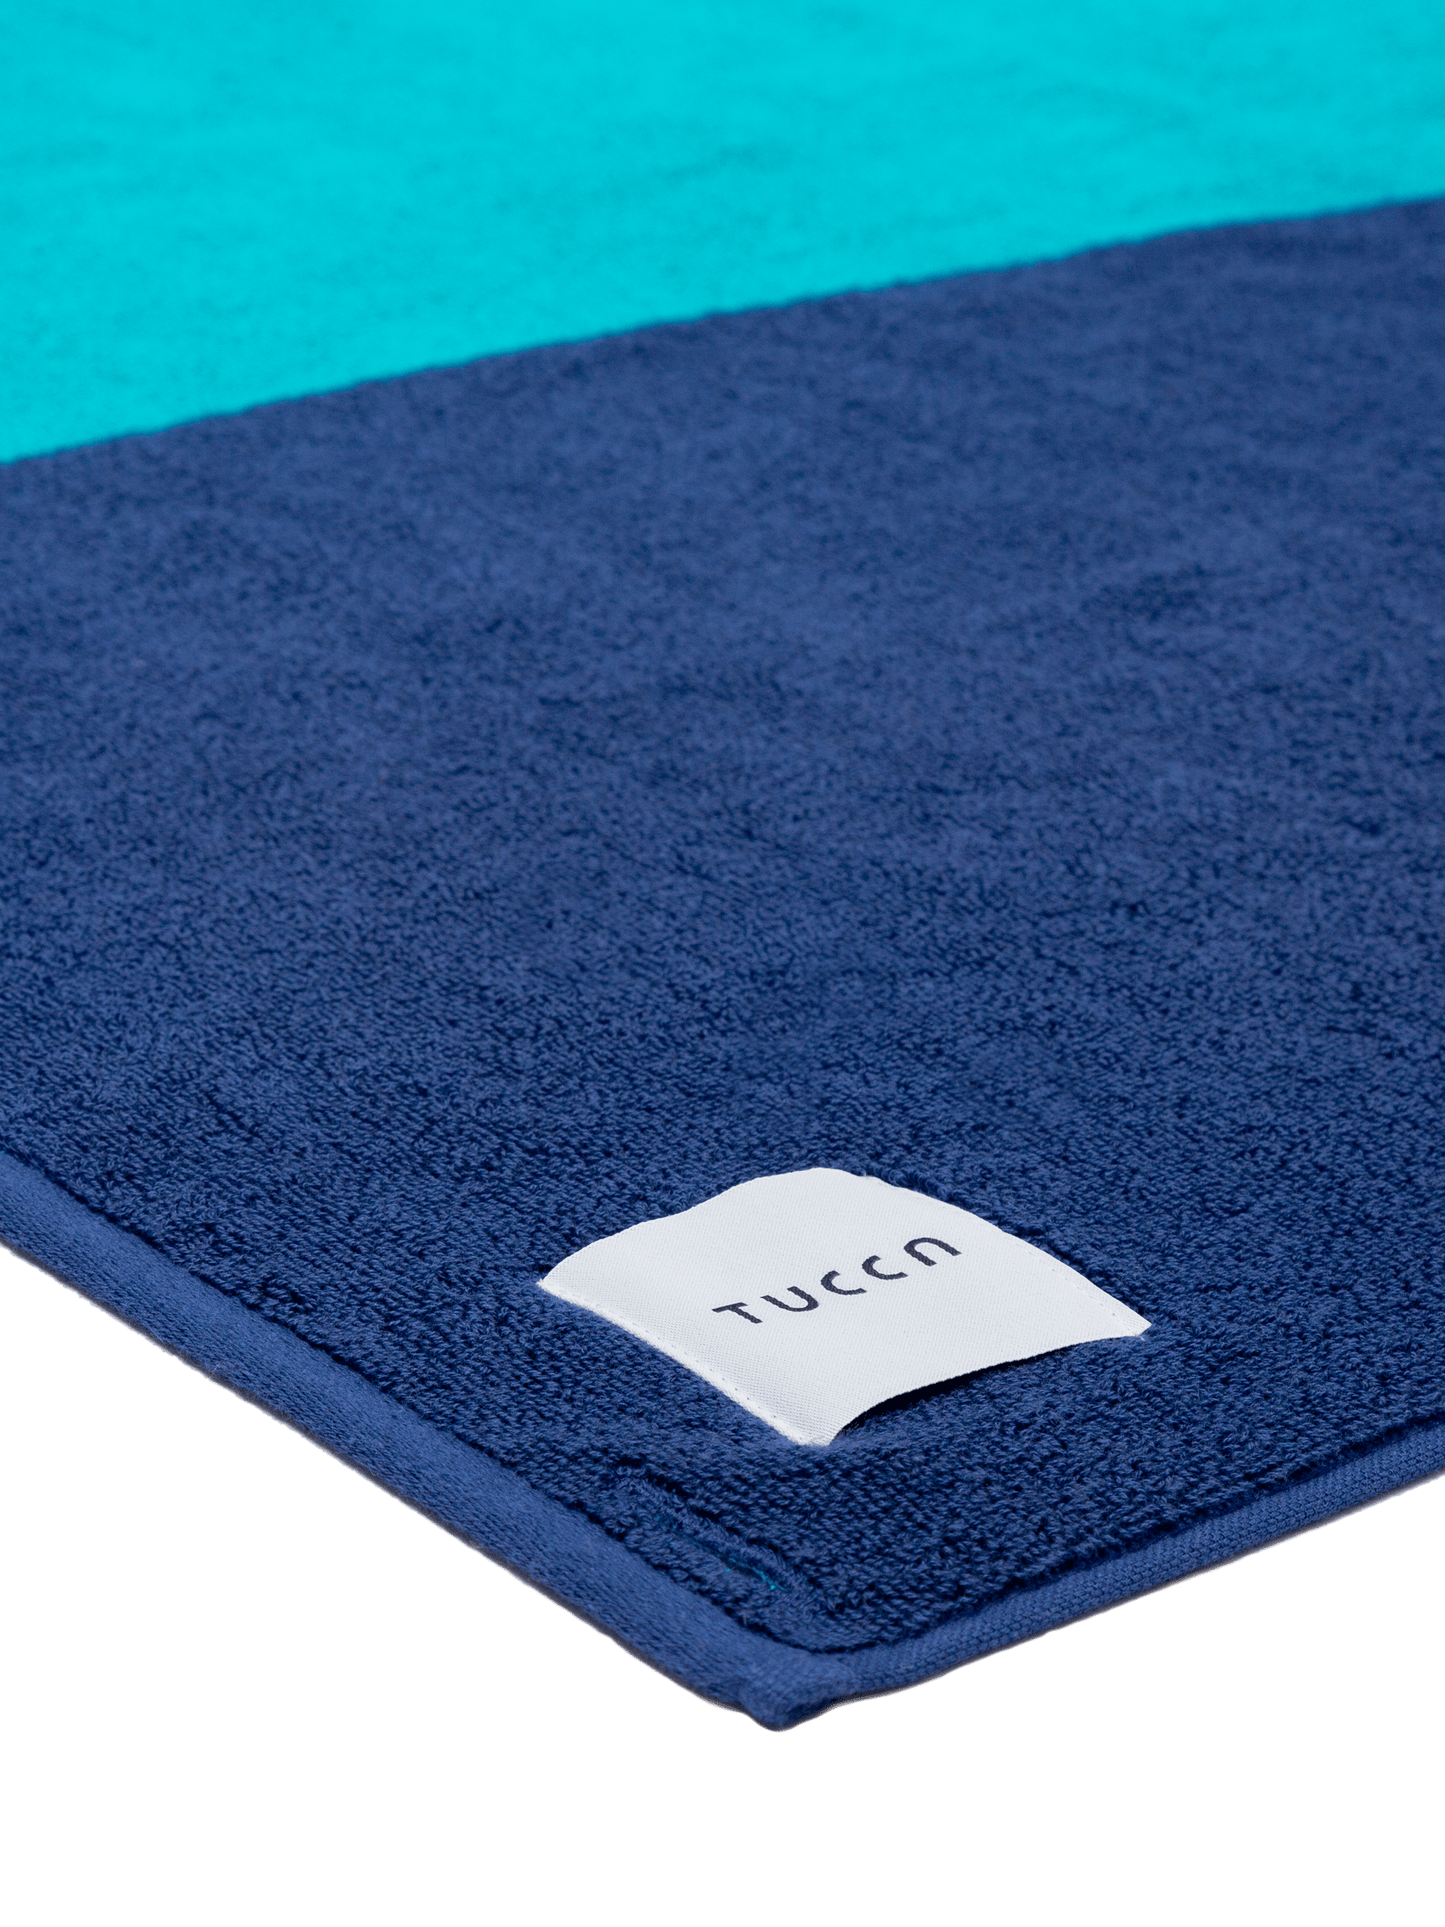 Swell Towel Towels Tucca 